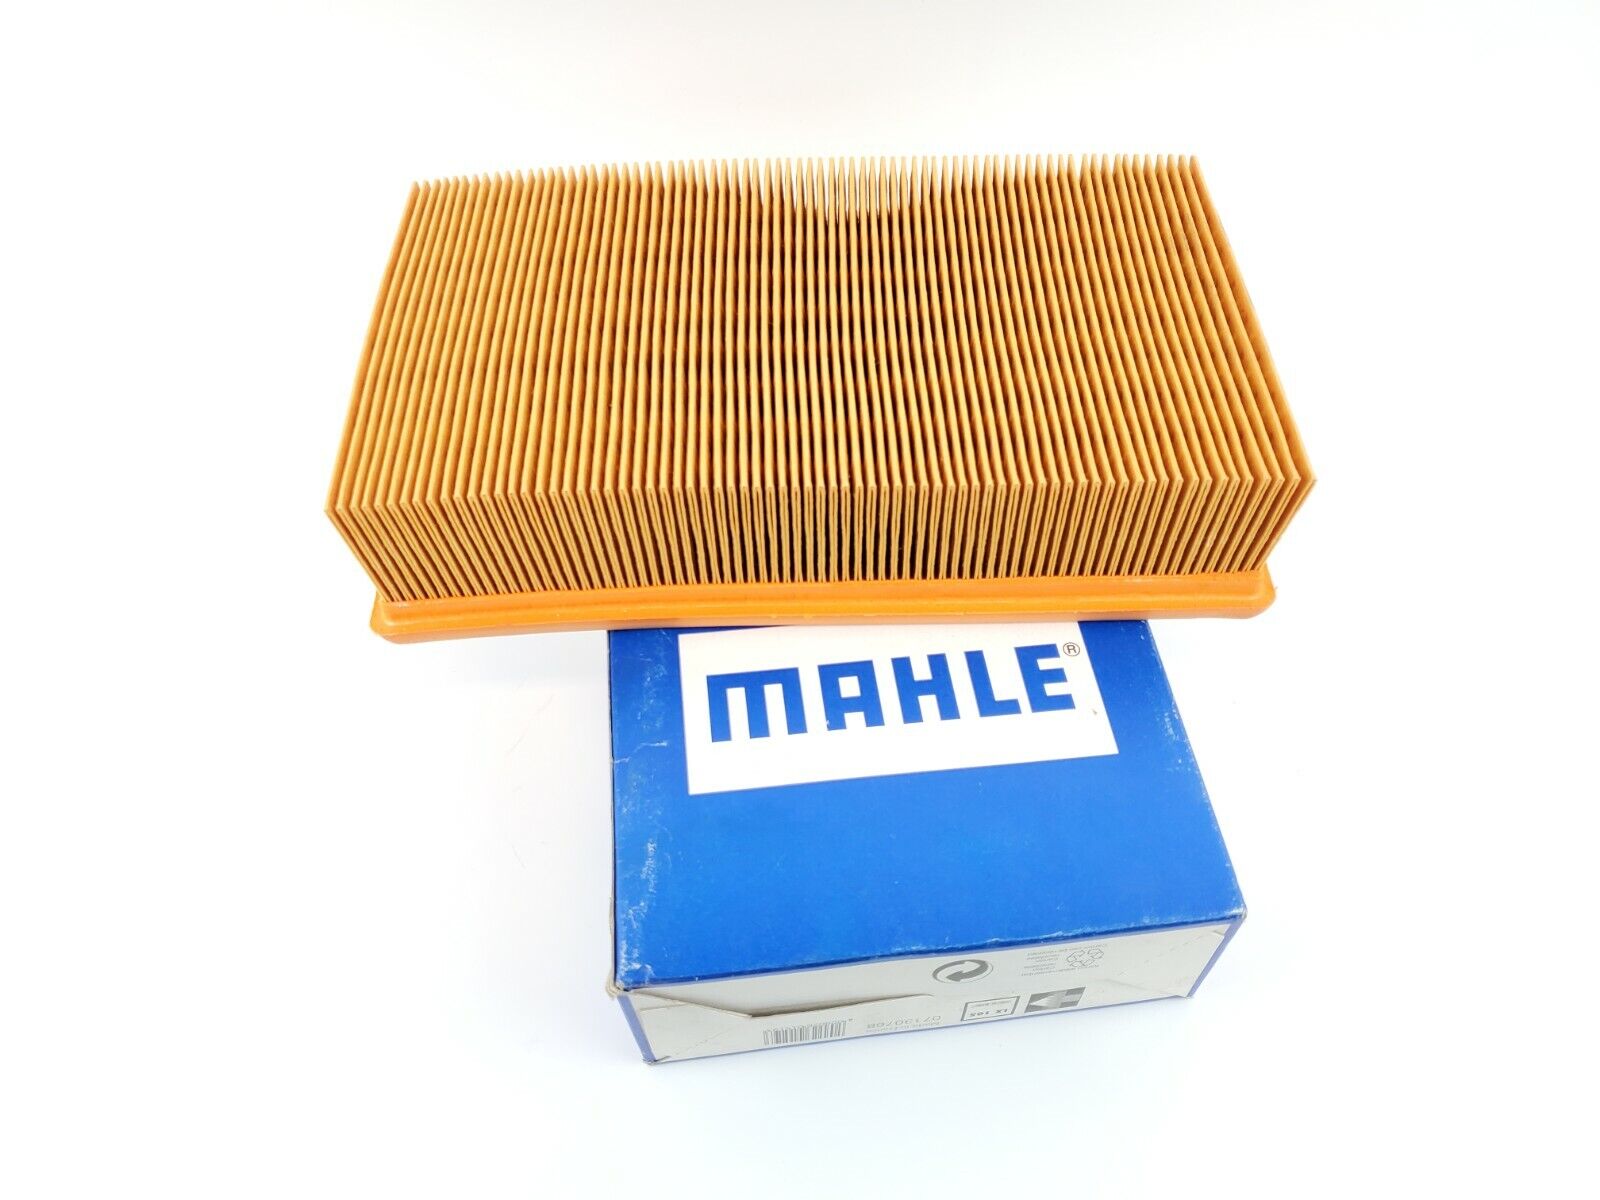 NOS Mahle BMW Air Filter Element LX105 318i 318is 325 325e 325es 325i 325is